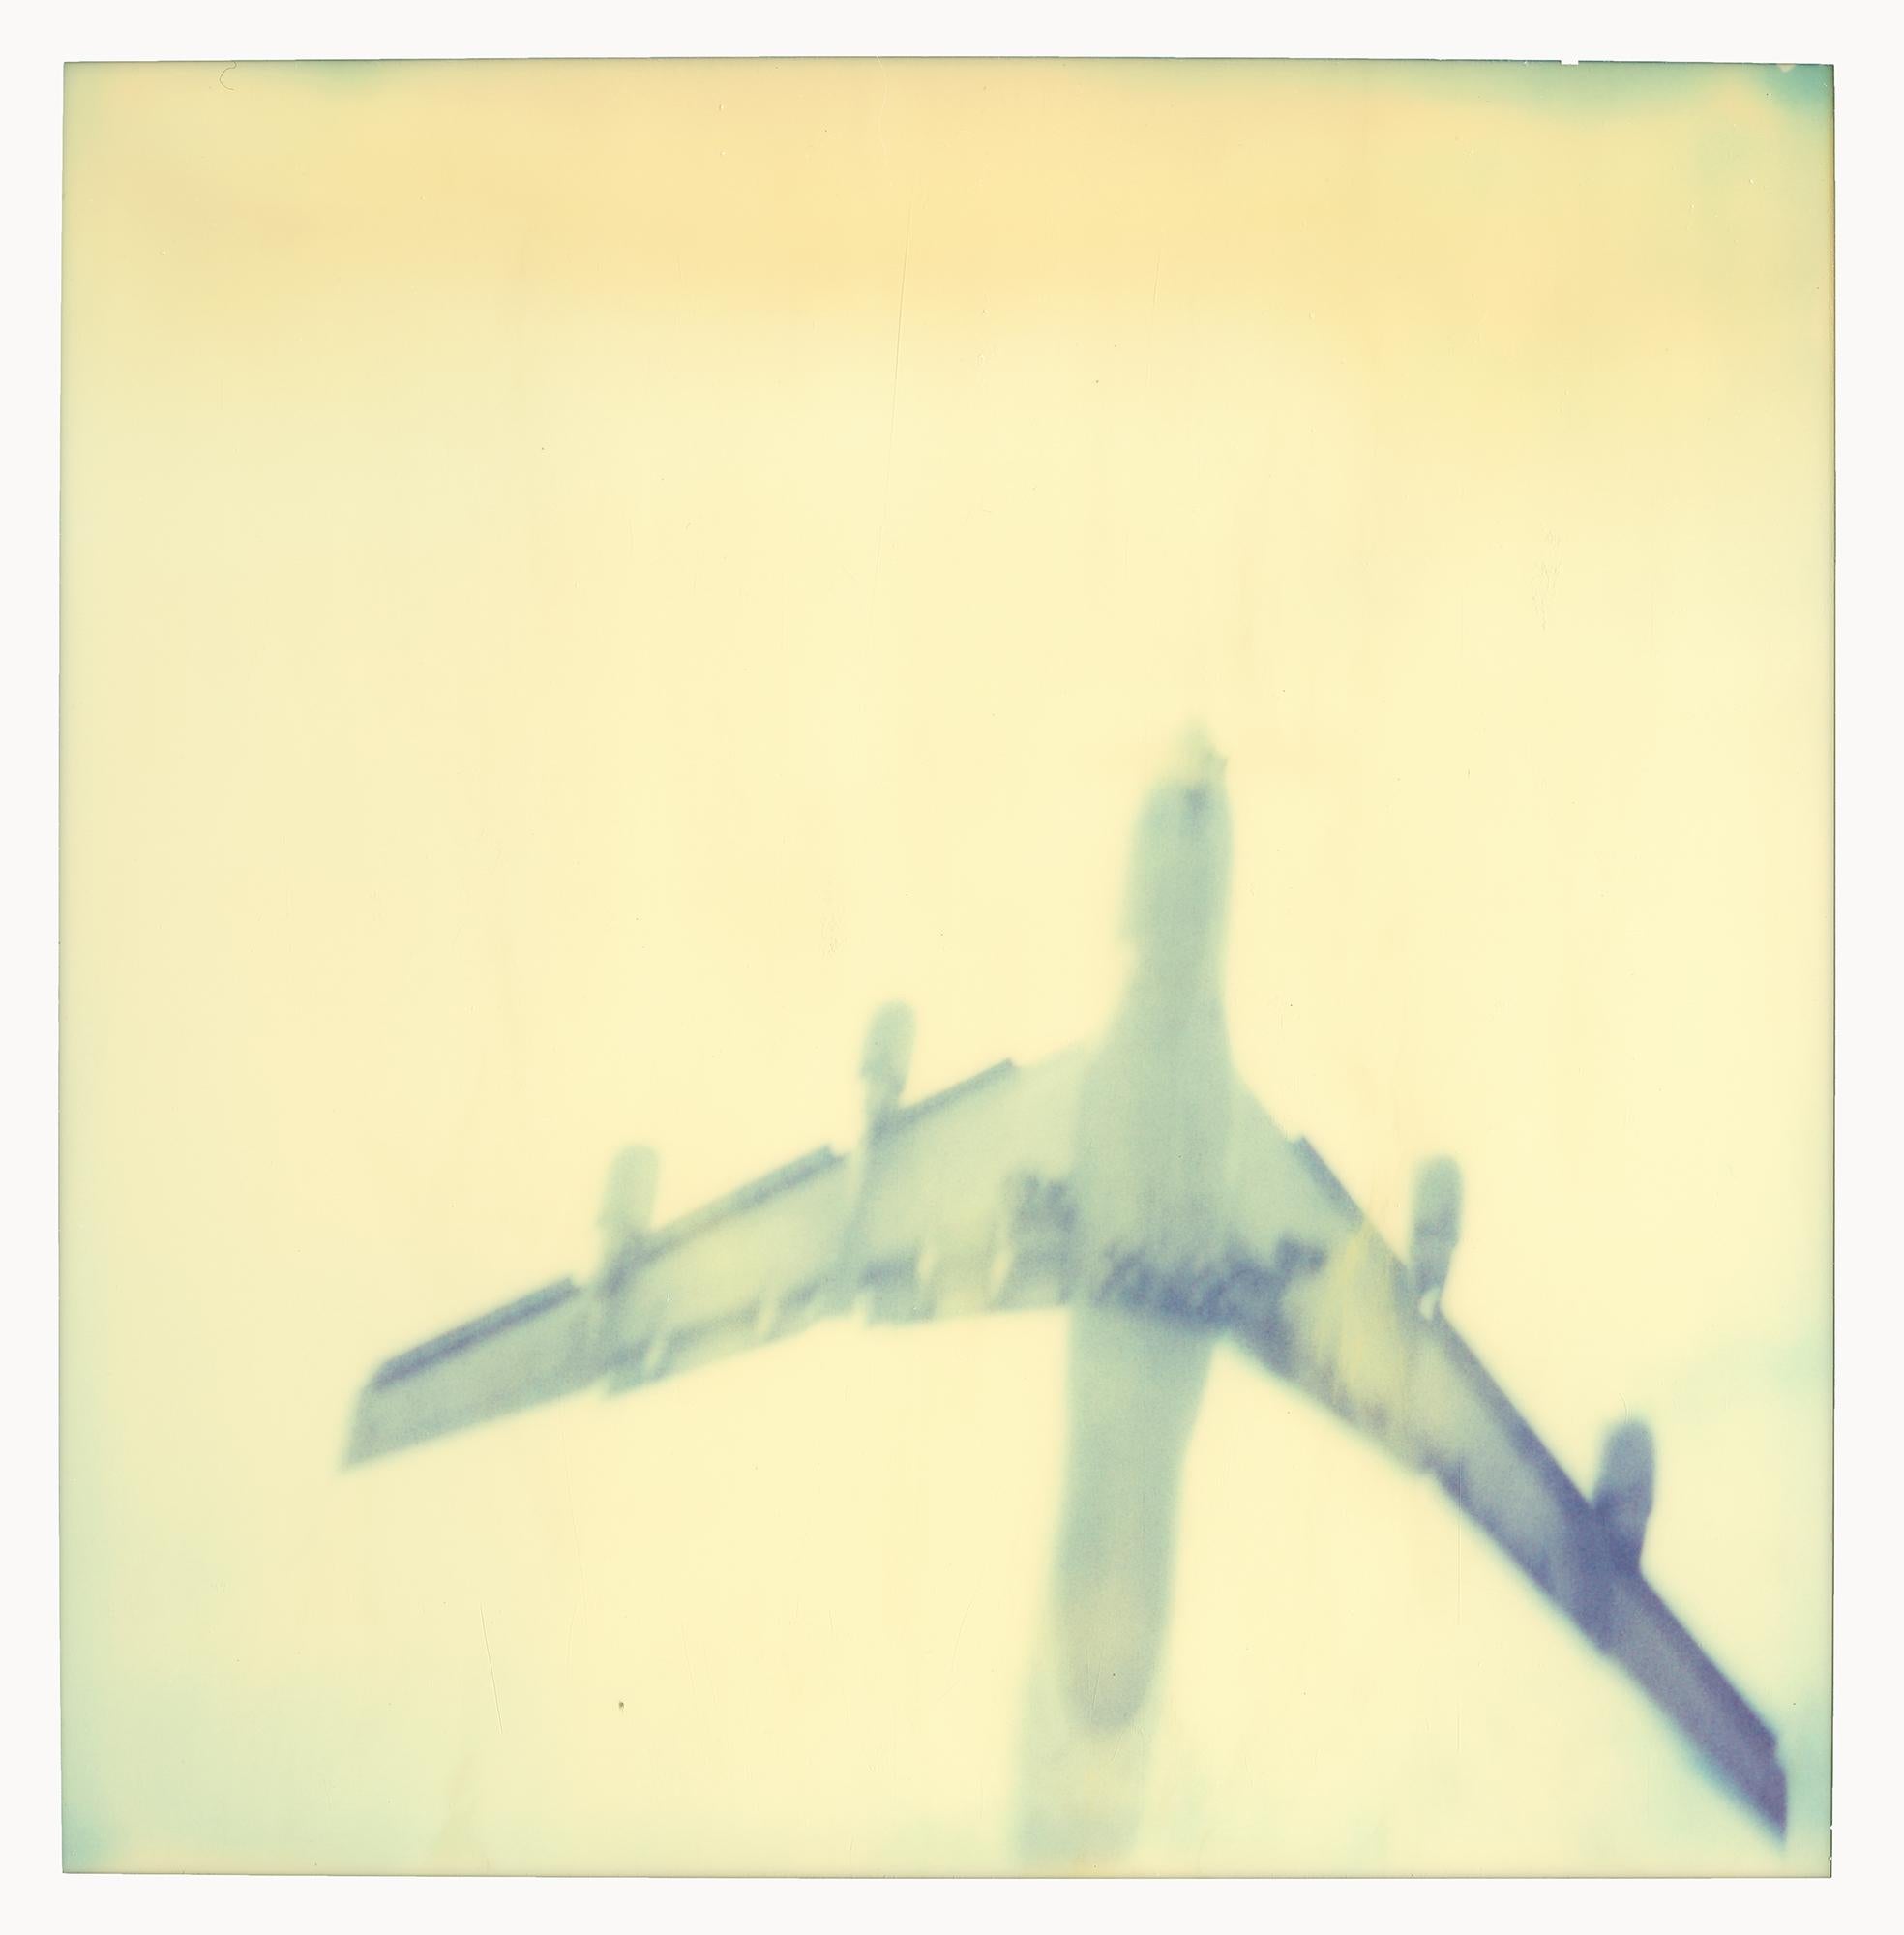 Planes (Stranger than Paradise) - 2001

57x56cm each plus 5 cm in between each print, 
installed 122x183cm, 
Edition of 10, 
6 analog C-Prints, hand-printed by the artist on Fuji Crystal Atchive, matte surface, based on 6 Polaroids, 
Signature label